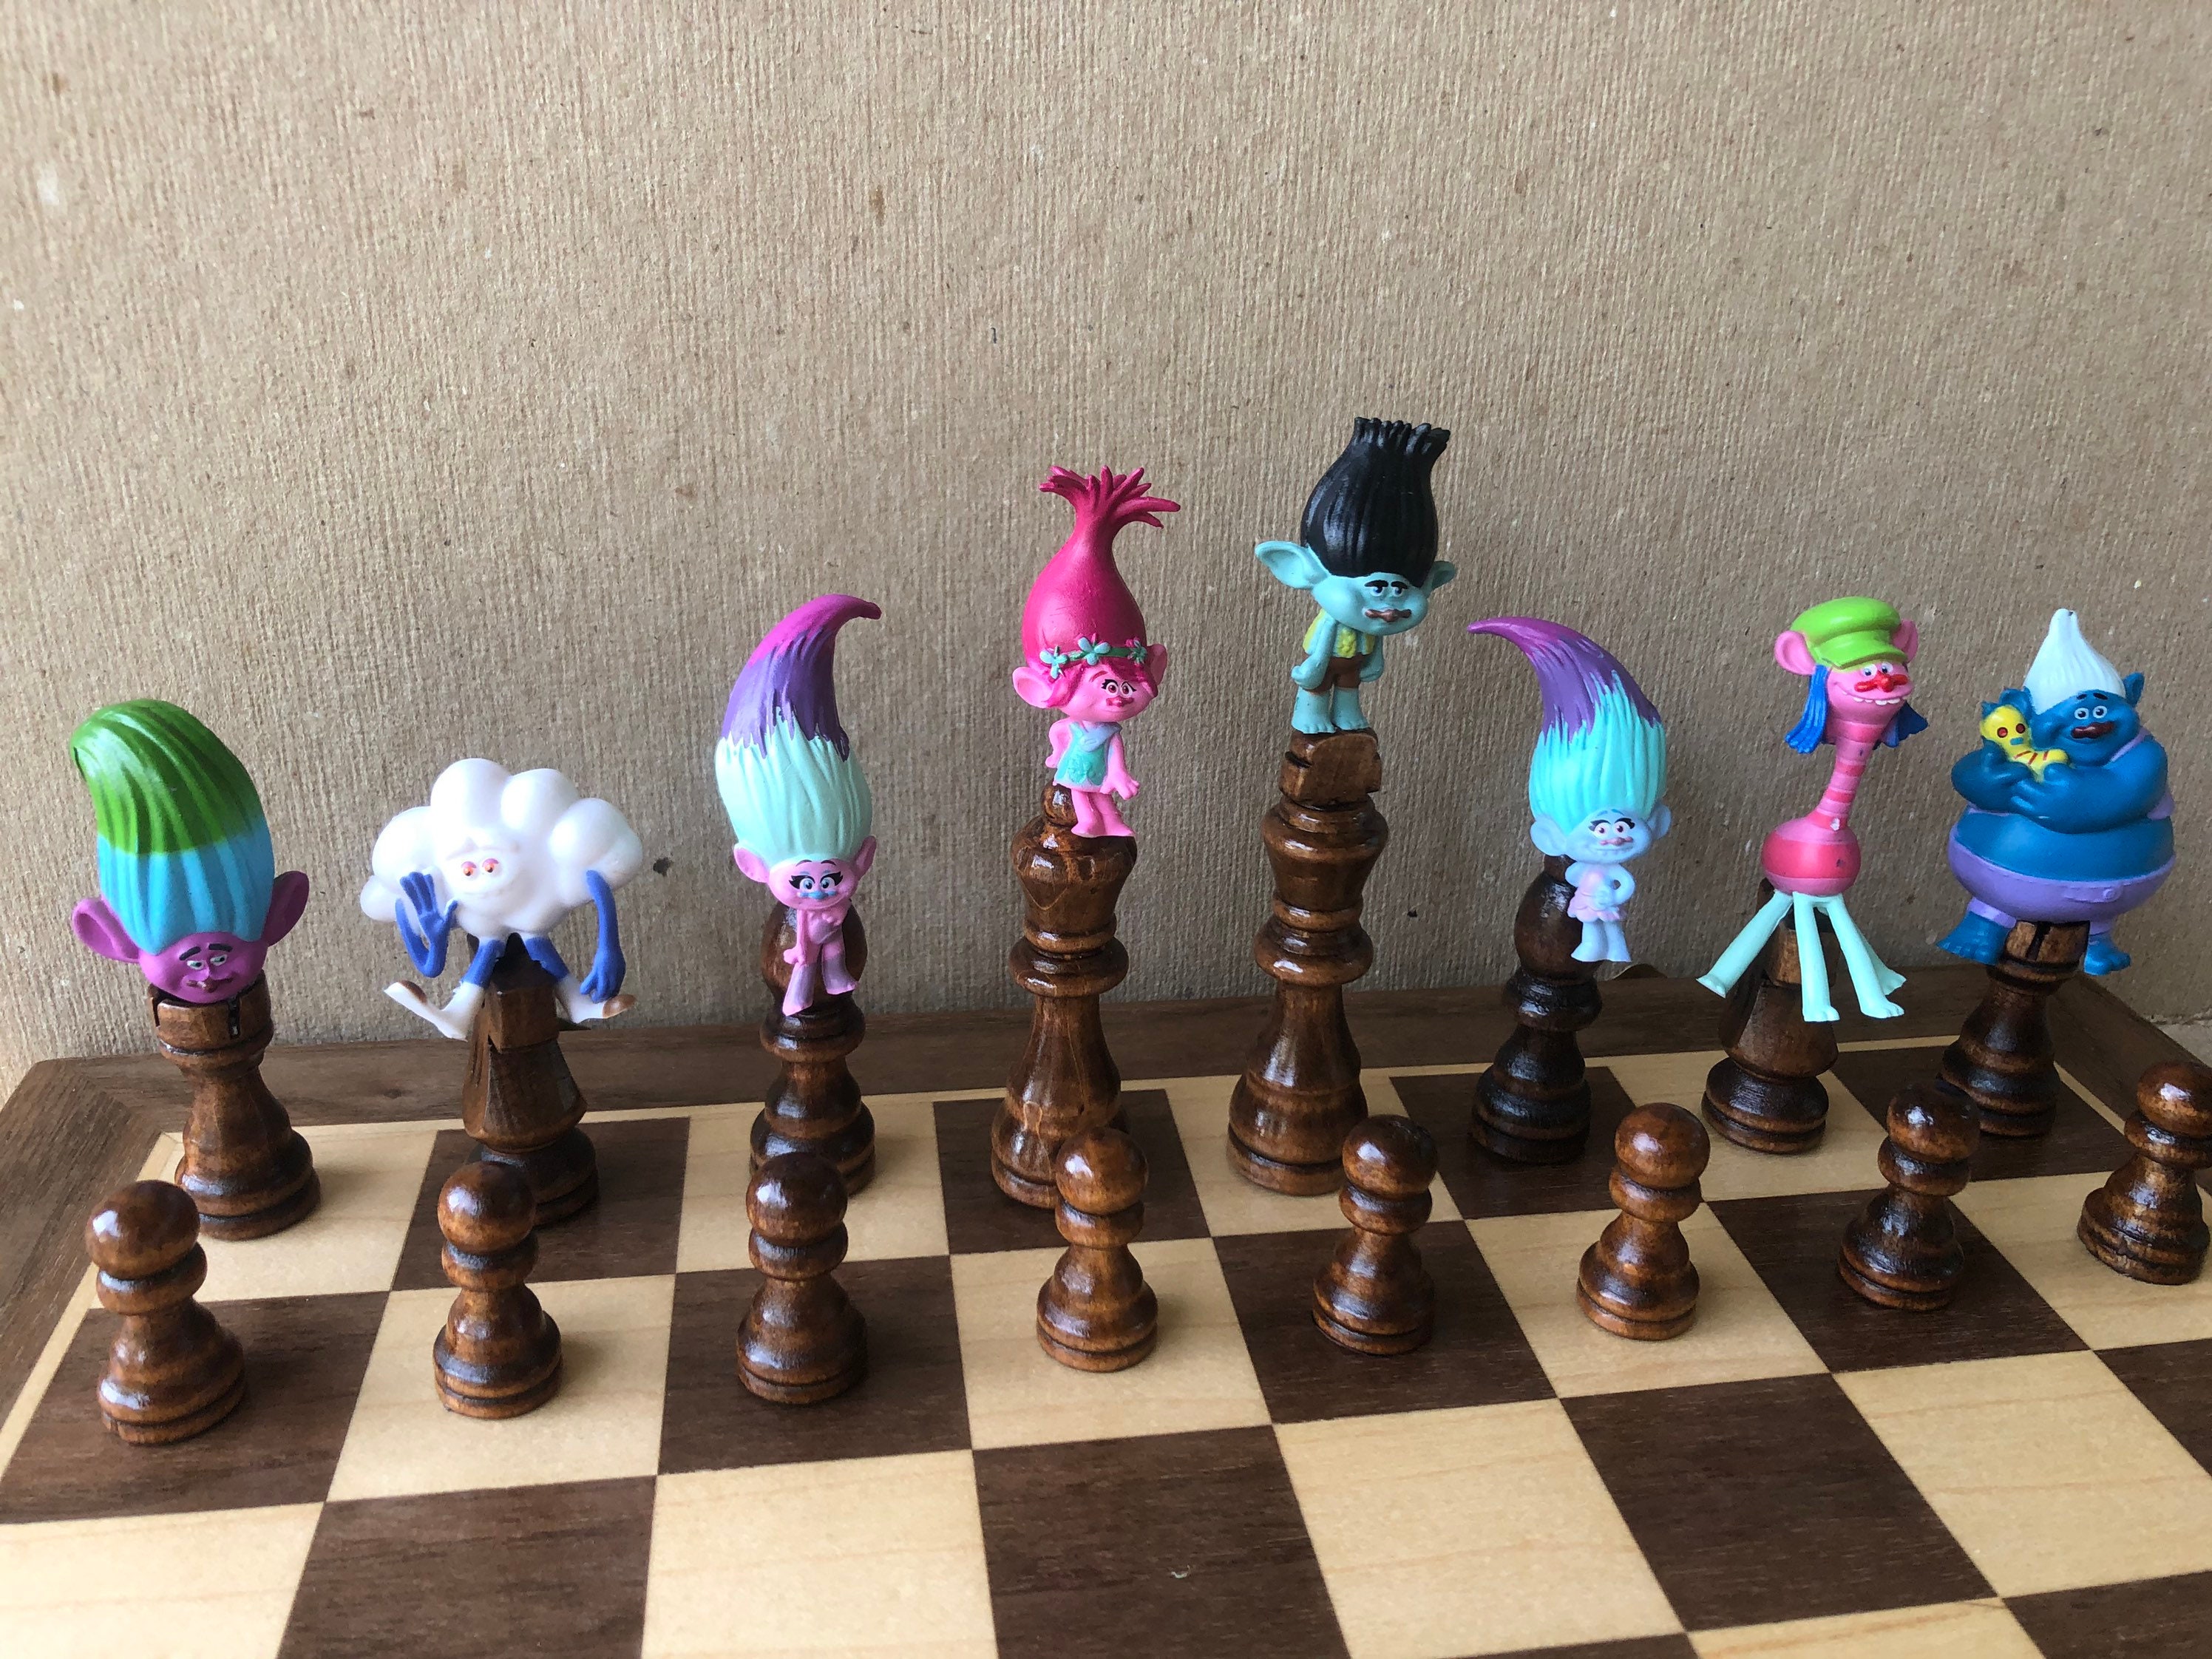 The Opening For Chess Trolls 